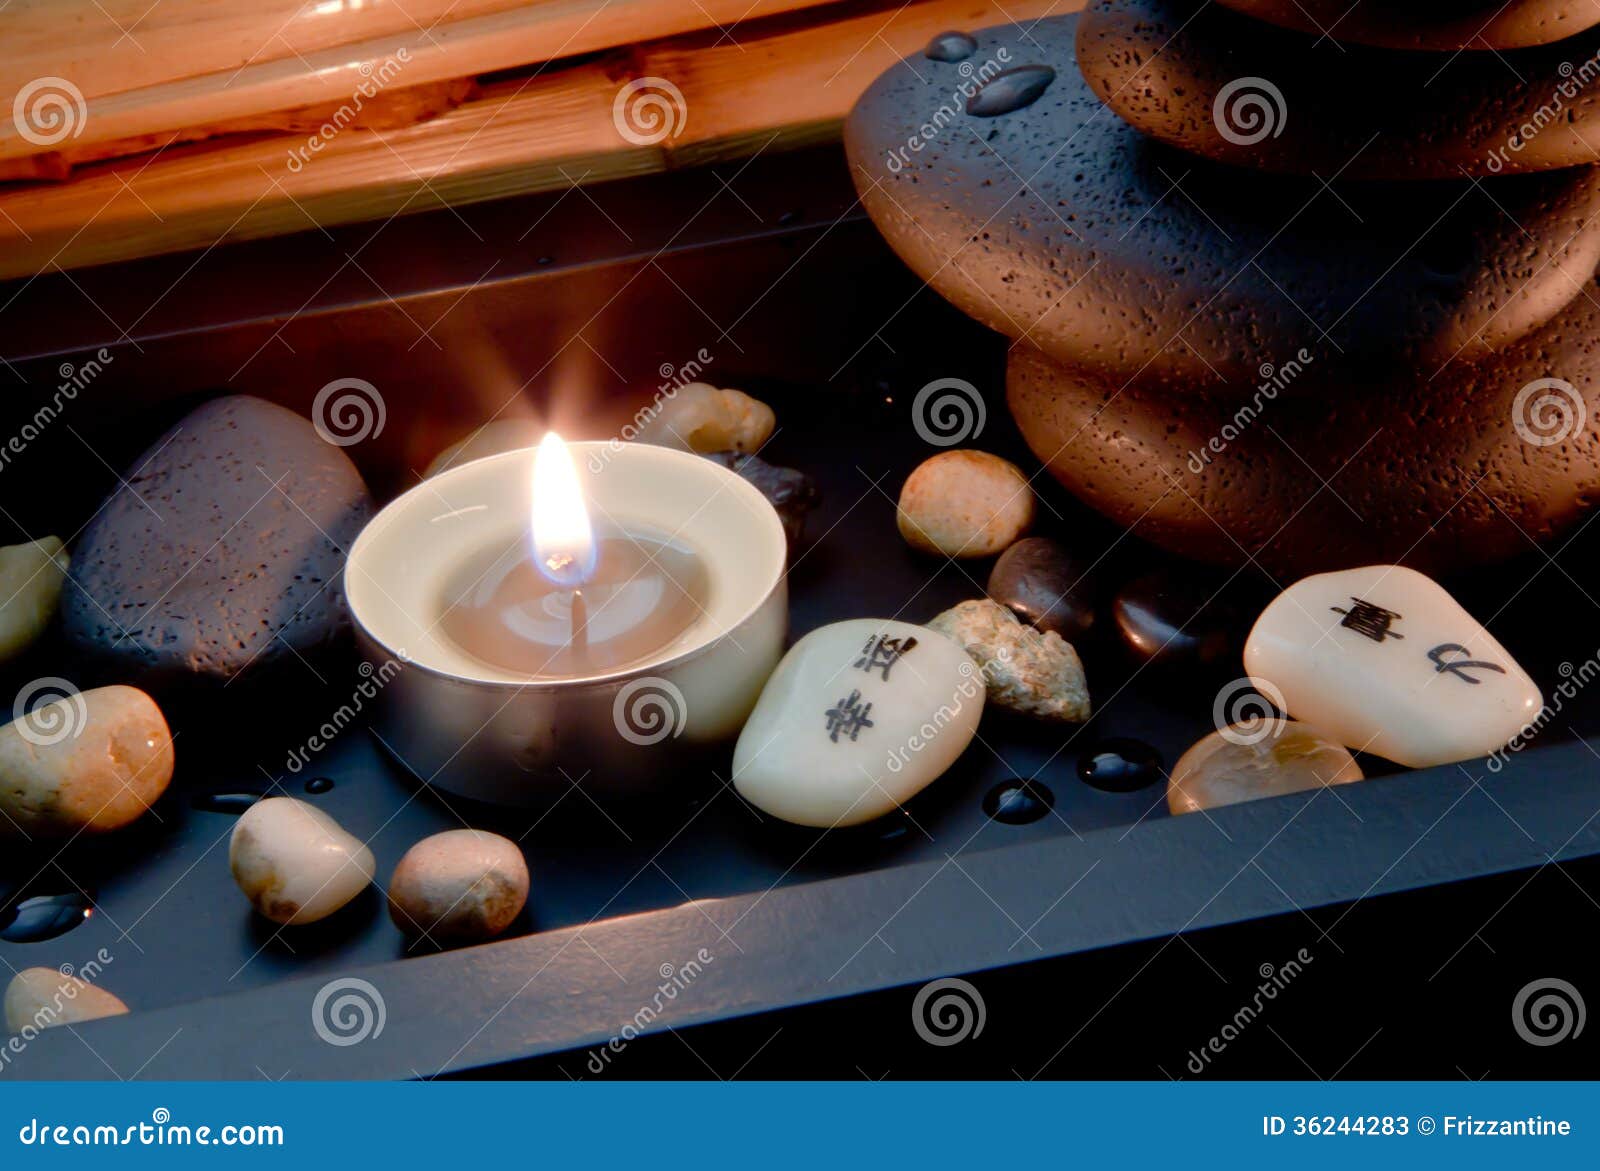 Spa Decoration In Asian Style With Stones And Candle Stock Photos